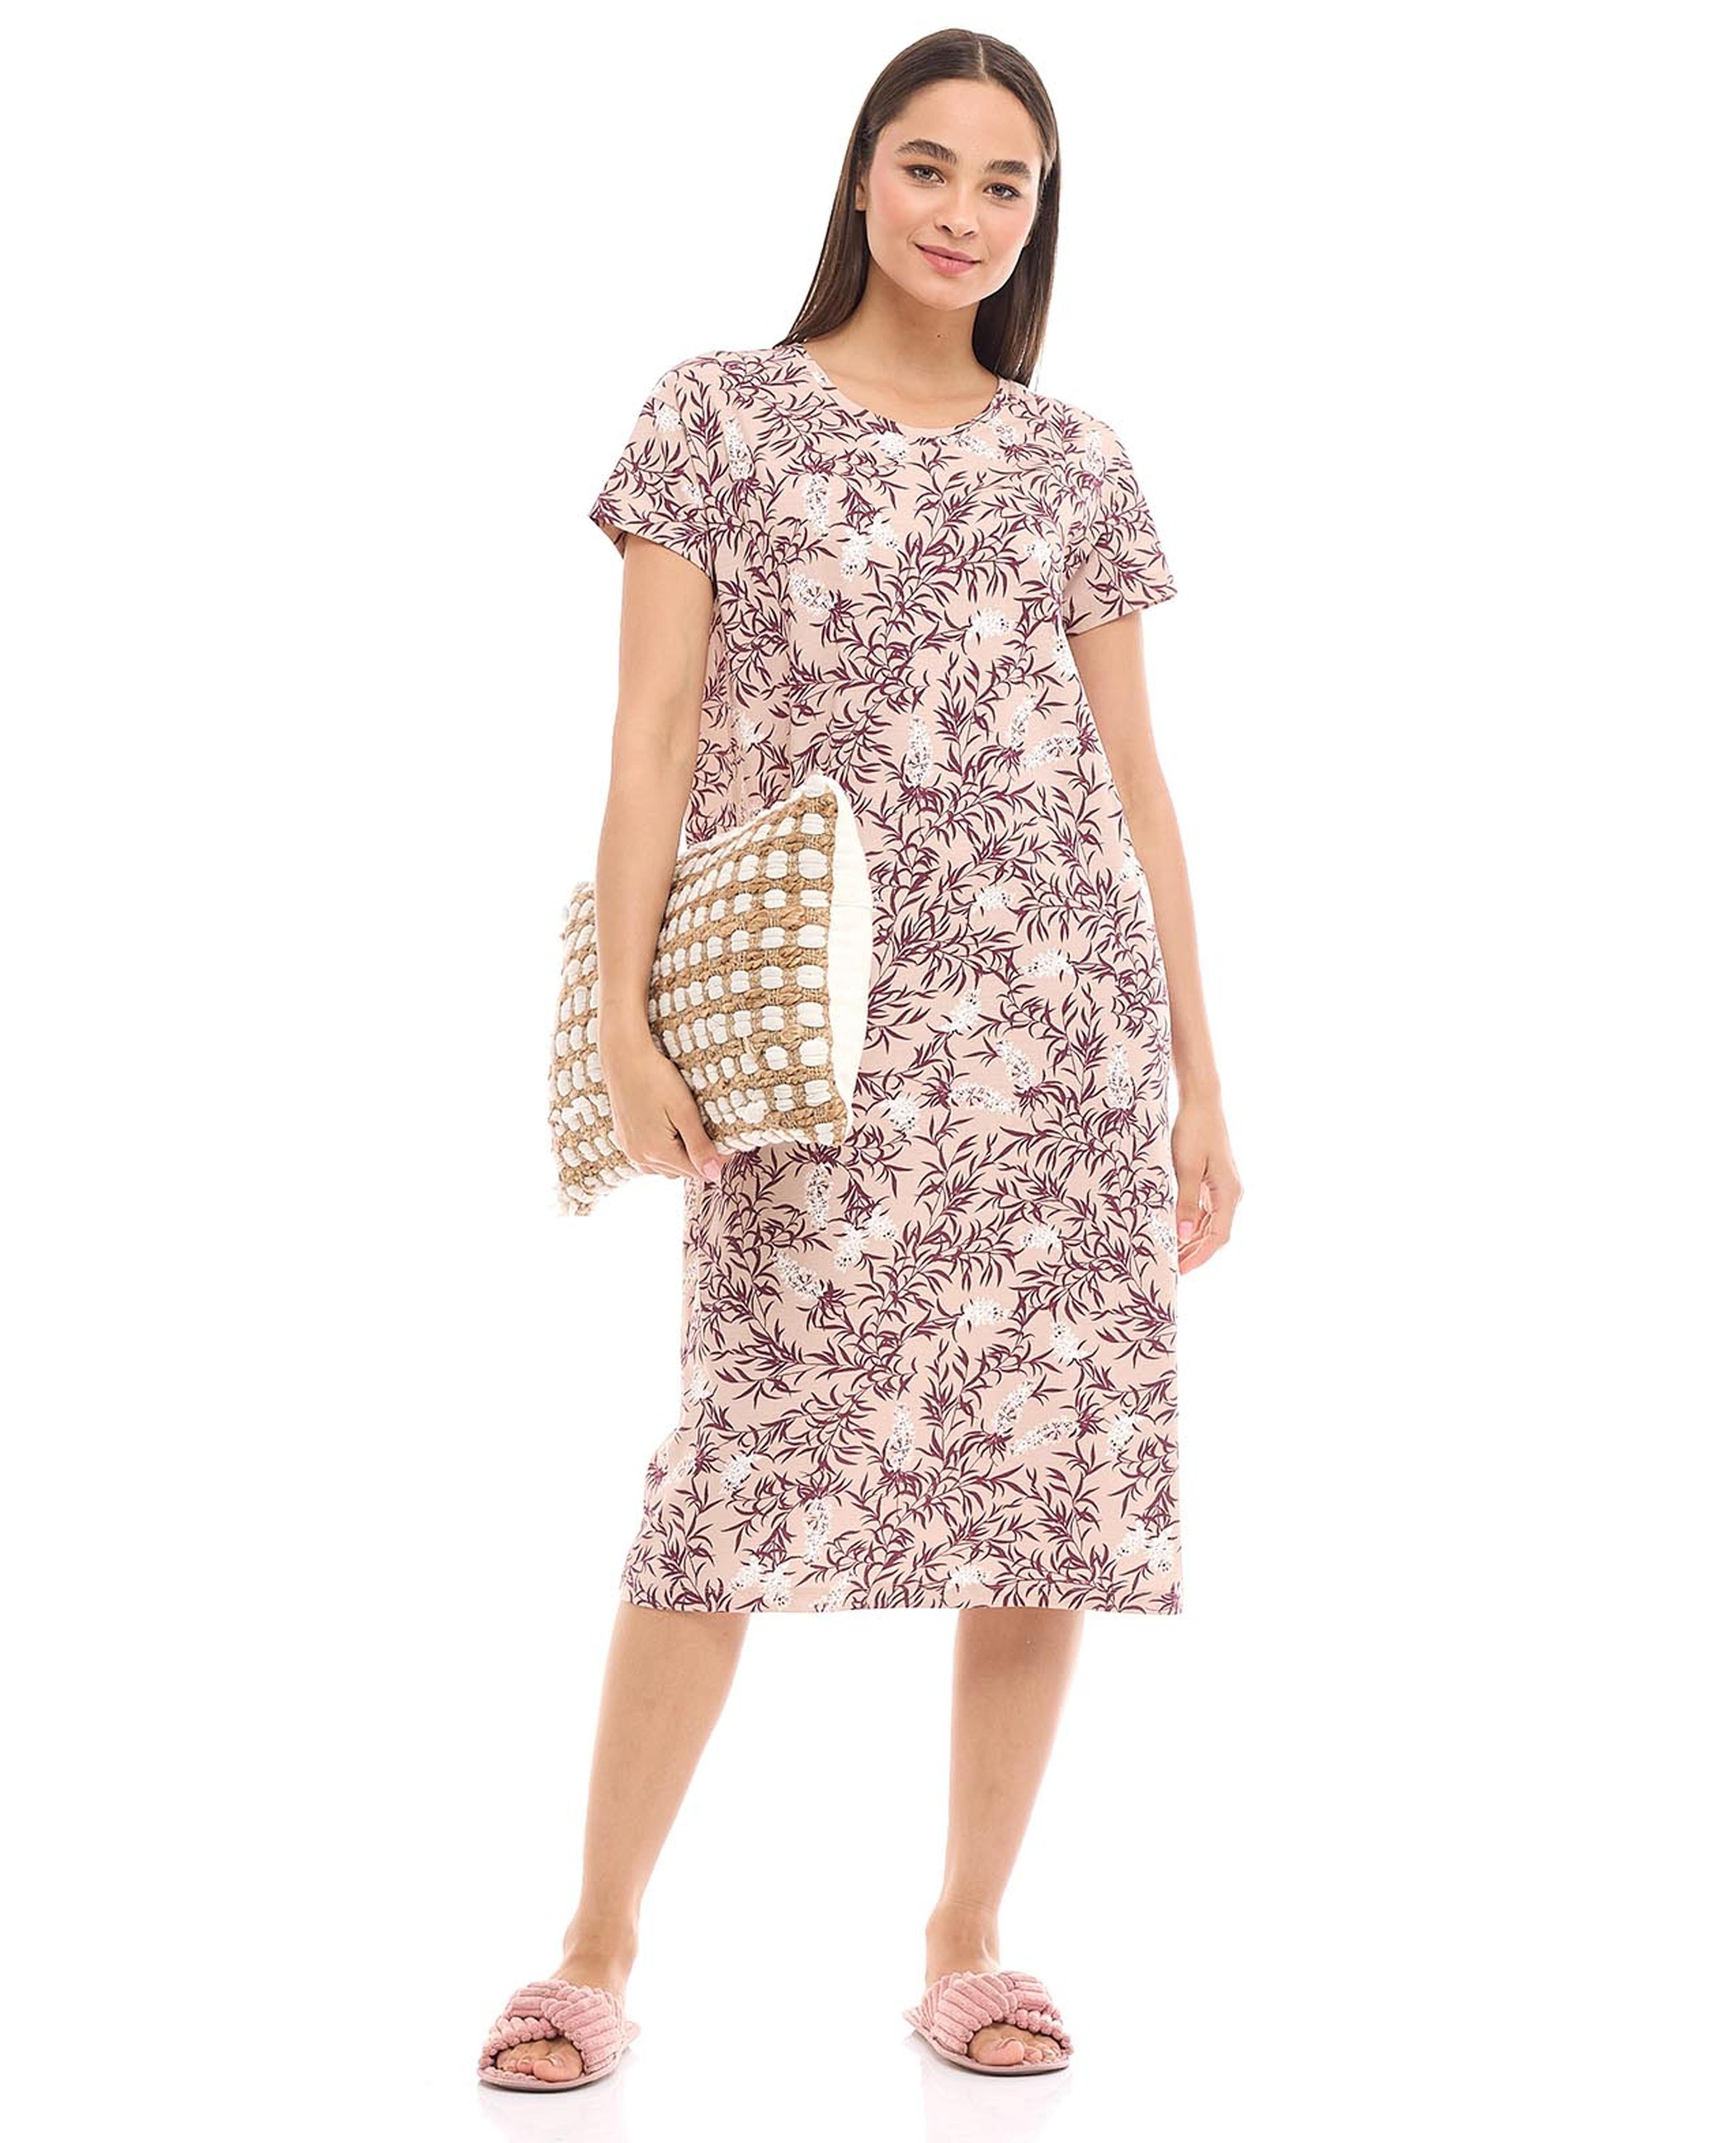 Floral Print Nightdress with Round Neck and Short Sleeves